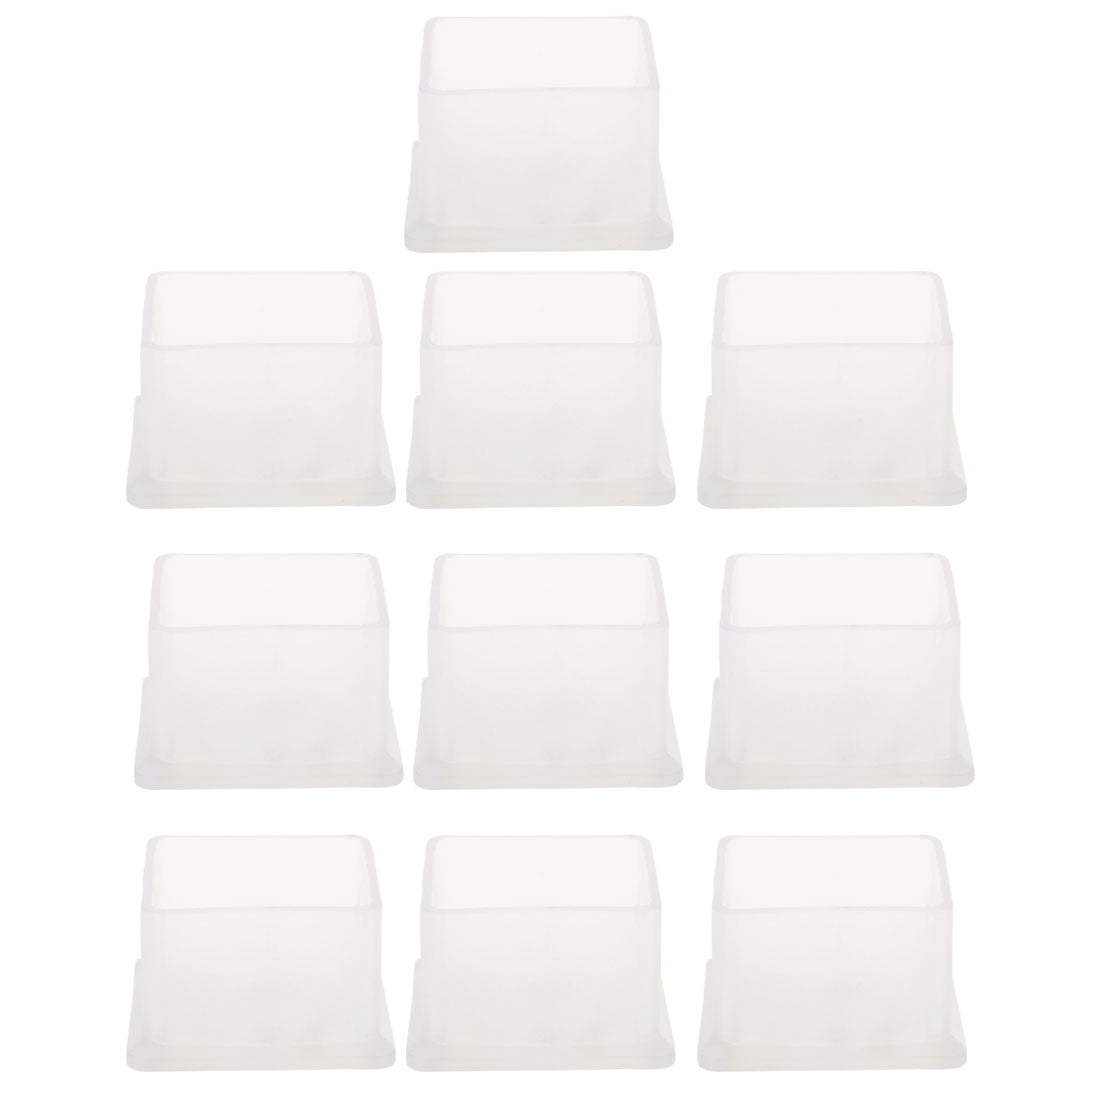 uxcell Uxcell Clear PVC Chair Leg Cap End Tip Feet Cover Furniture Floor Protector 10pcs Reduce Noise Prevent Scratch